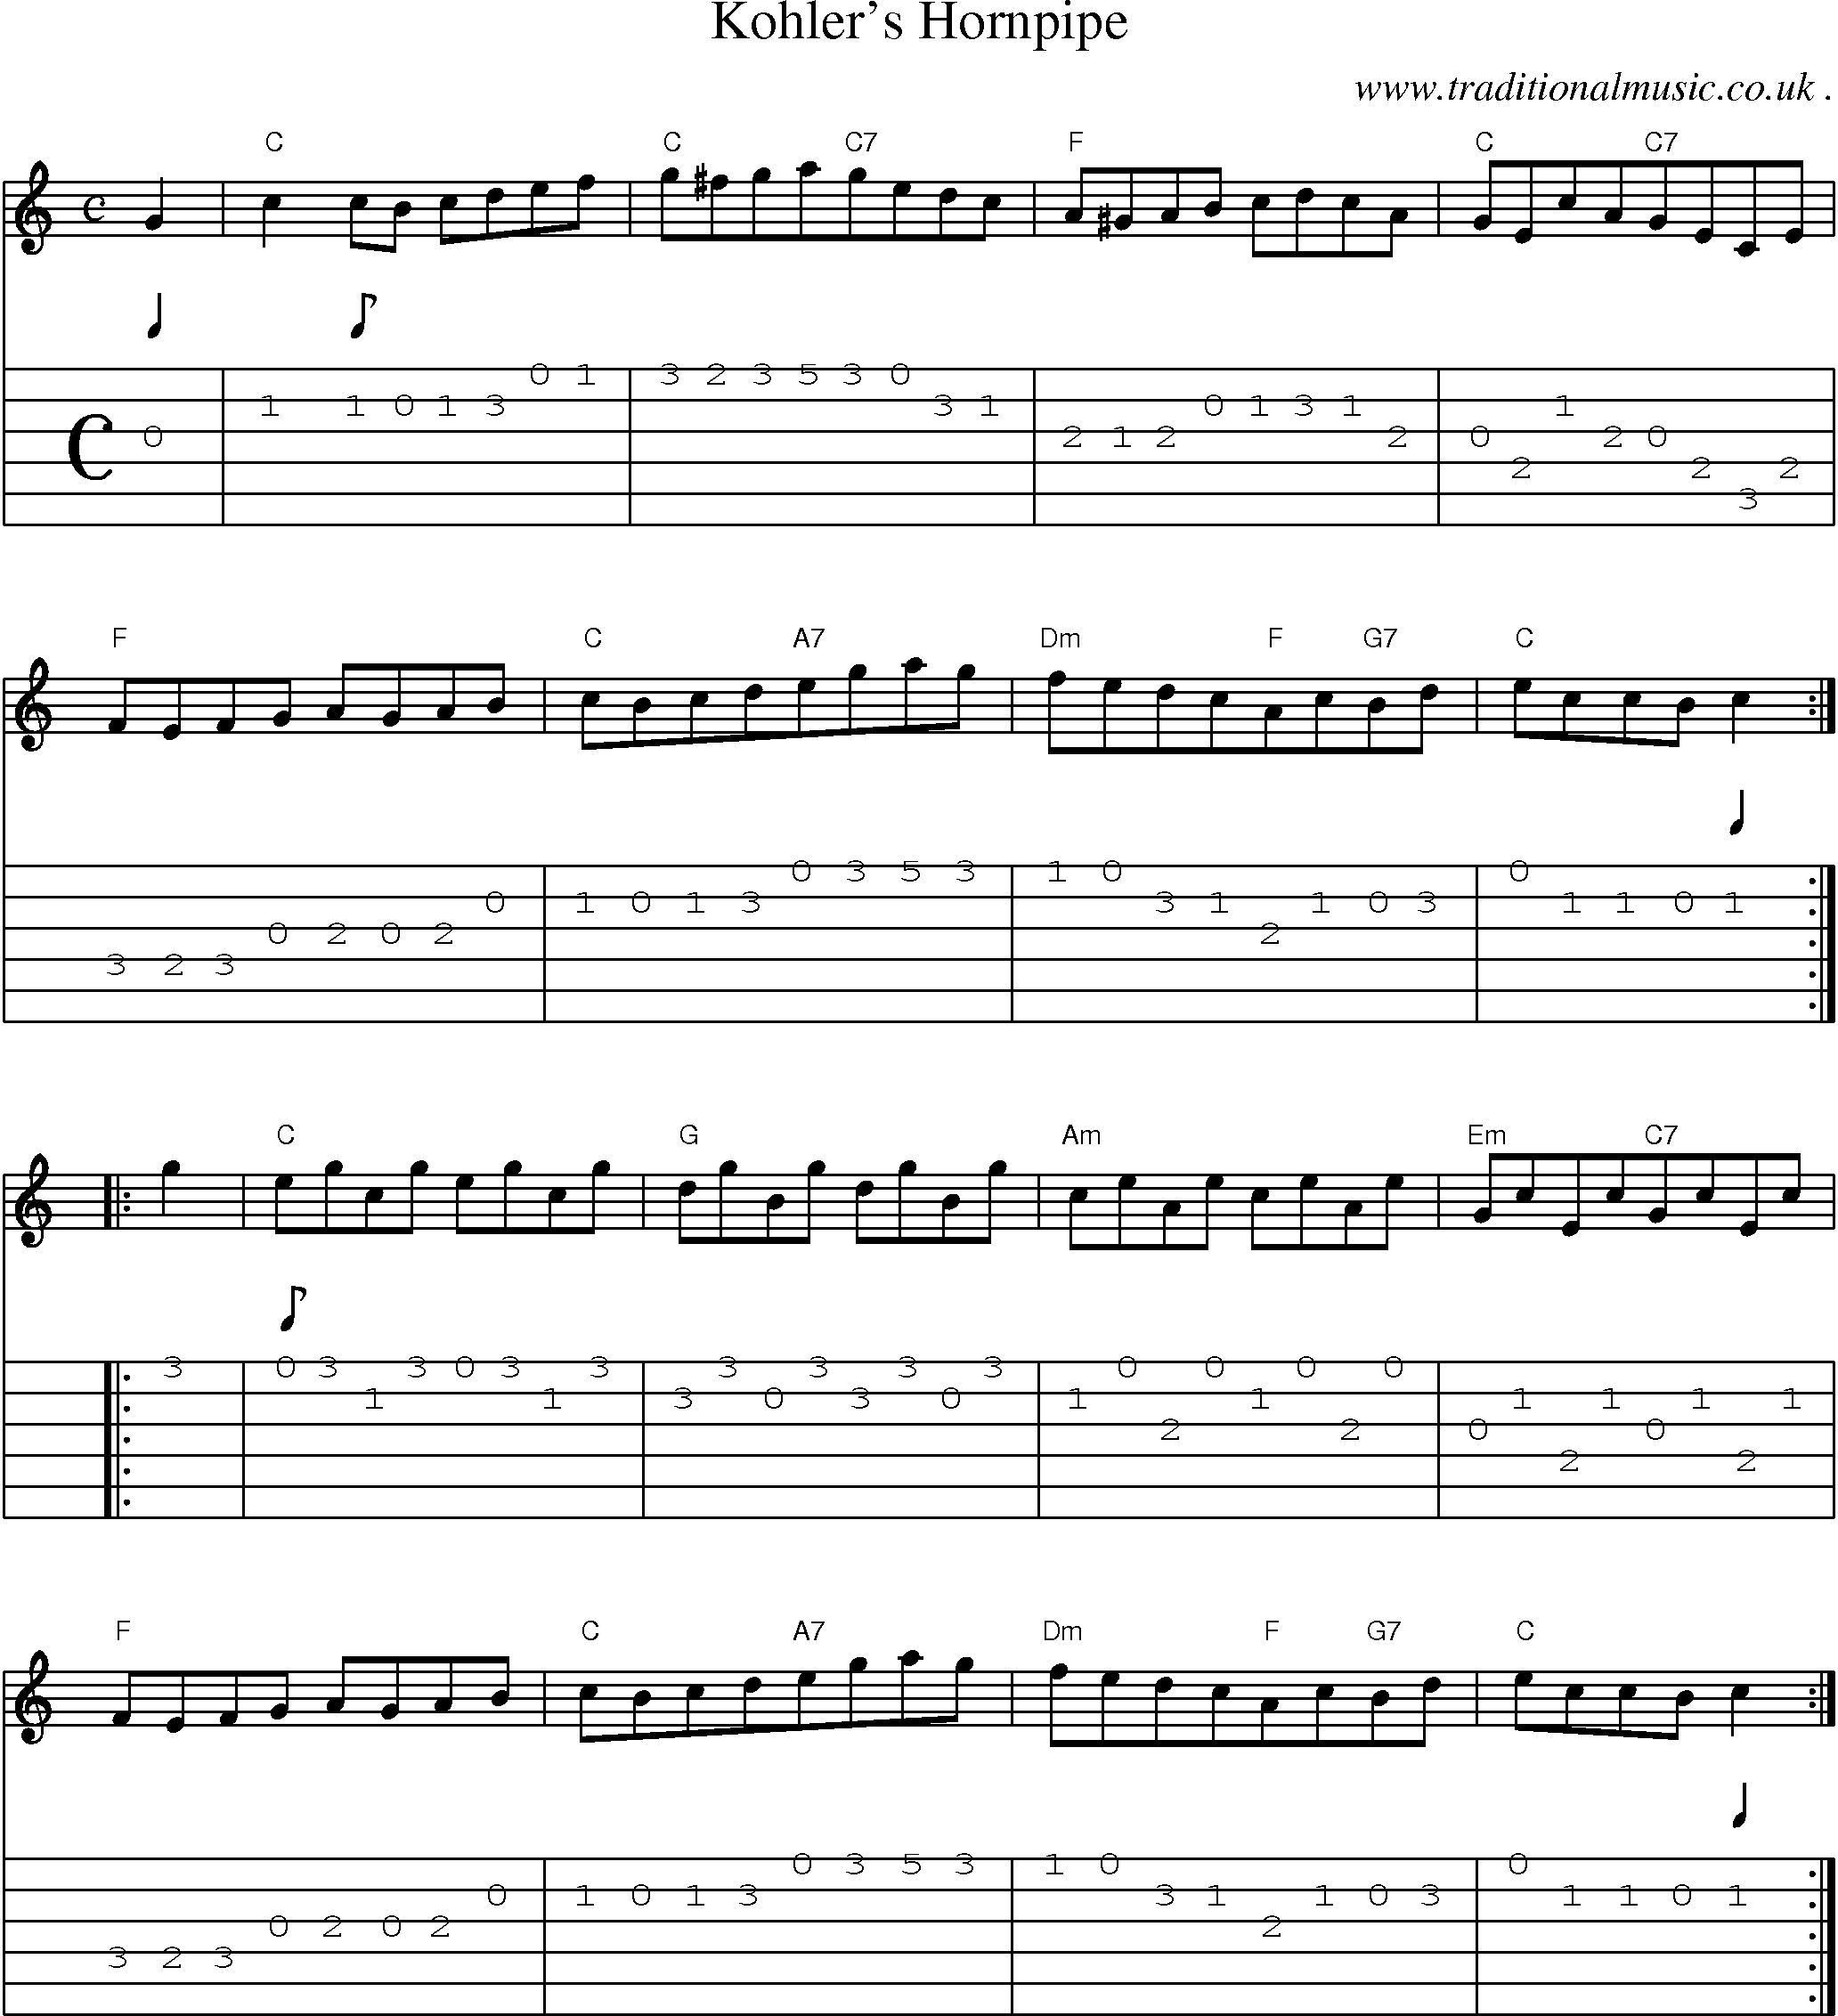 Sheet-Music and Guitar Tabs for Kohlers Hornpipe